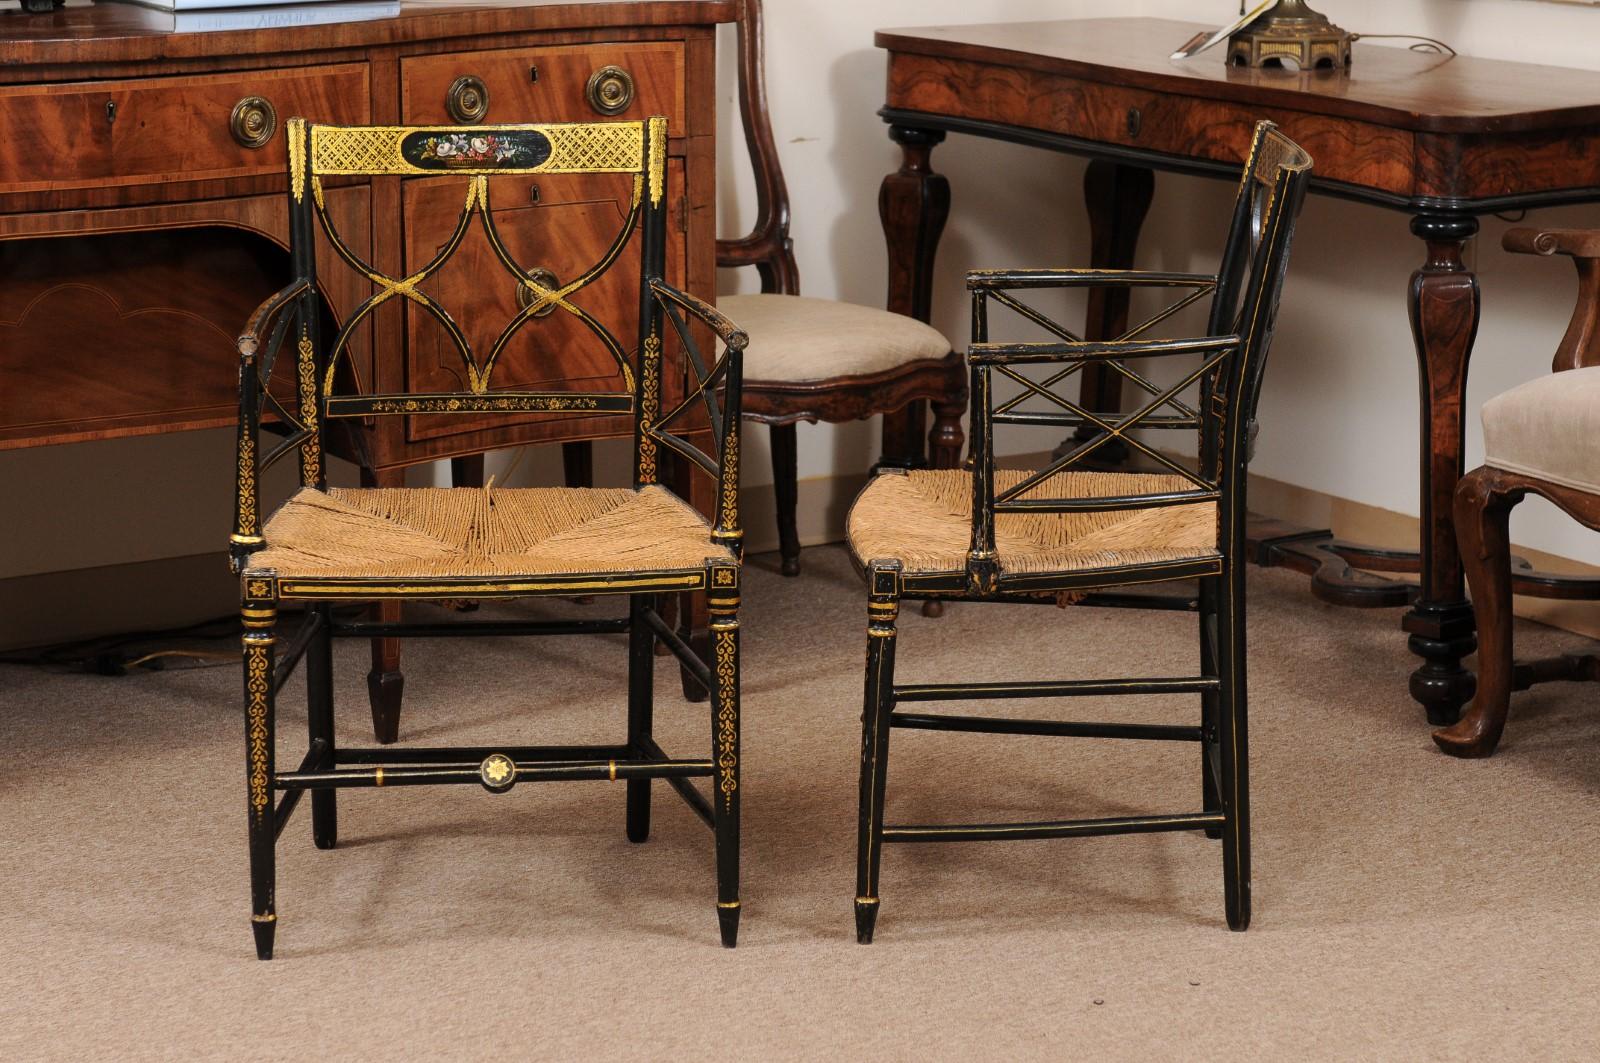  Pair of Regency Black Painted Arm Chairs with Floral Decoration & Rush Seats For Sale 4